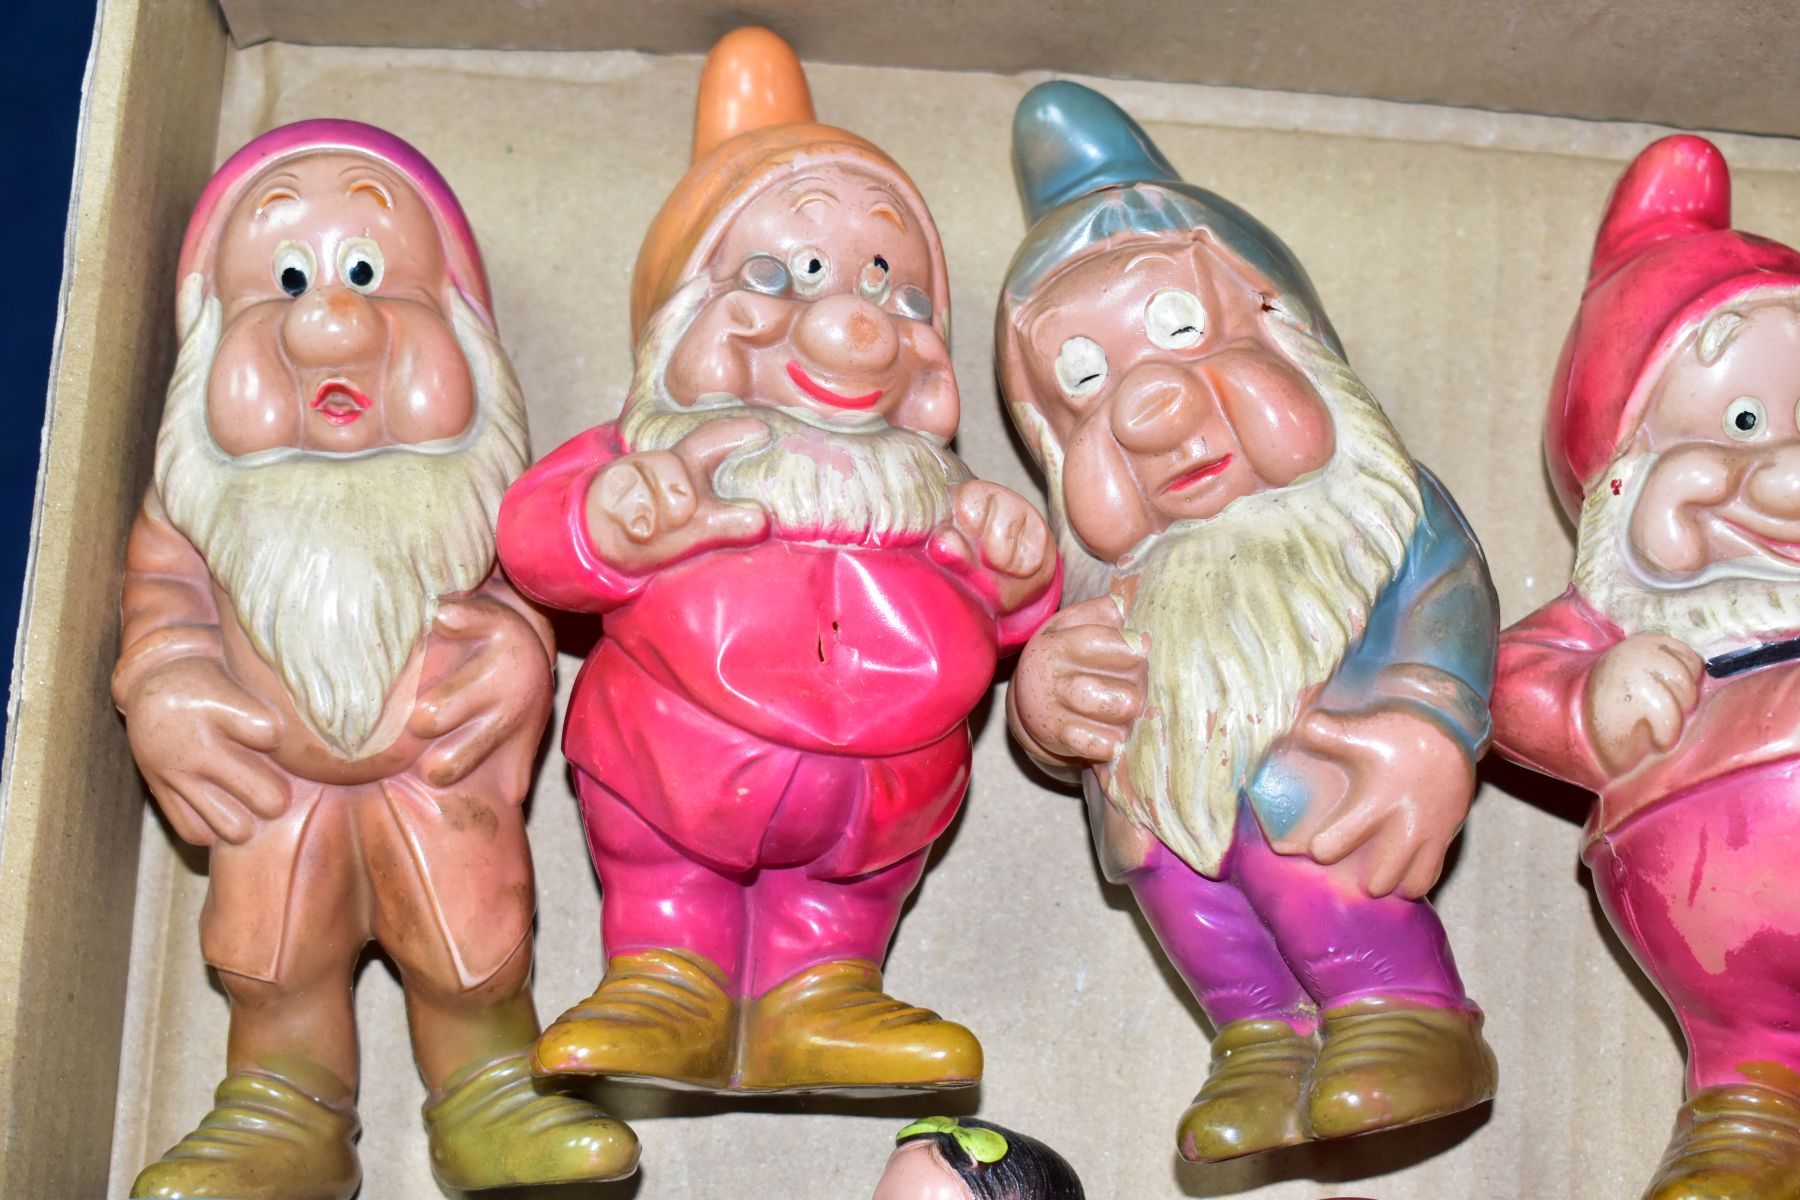 VINTAGE JAPANESE CELLULOID SNOW WHITE AND THE SEVEN DWARFS FIGURES, hand painted, approximate height - Image 3 of 6